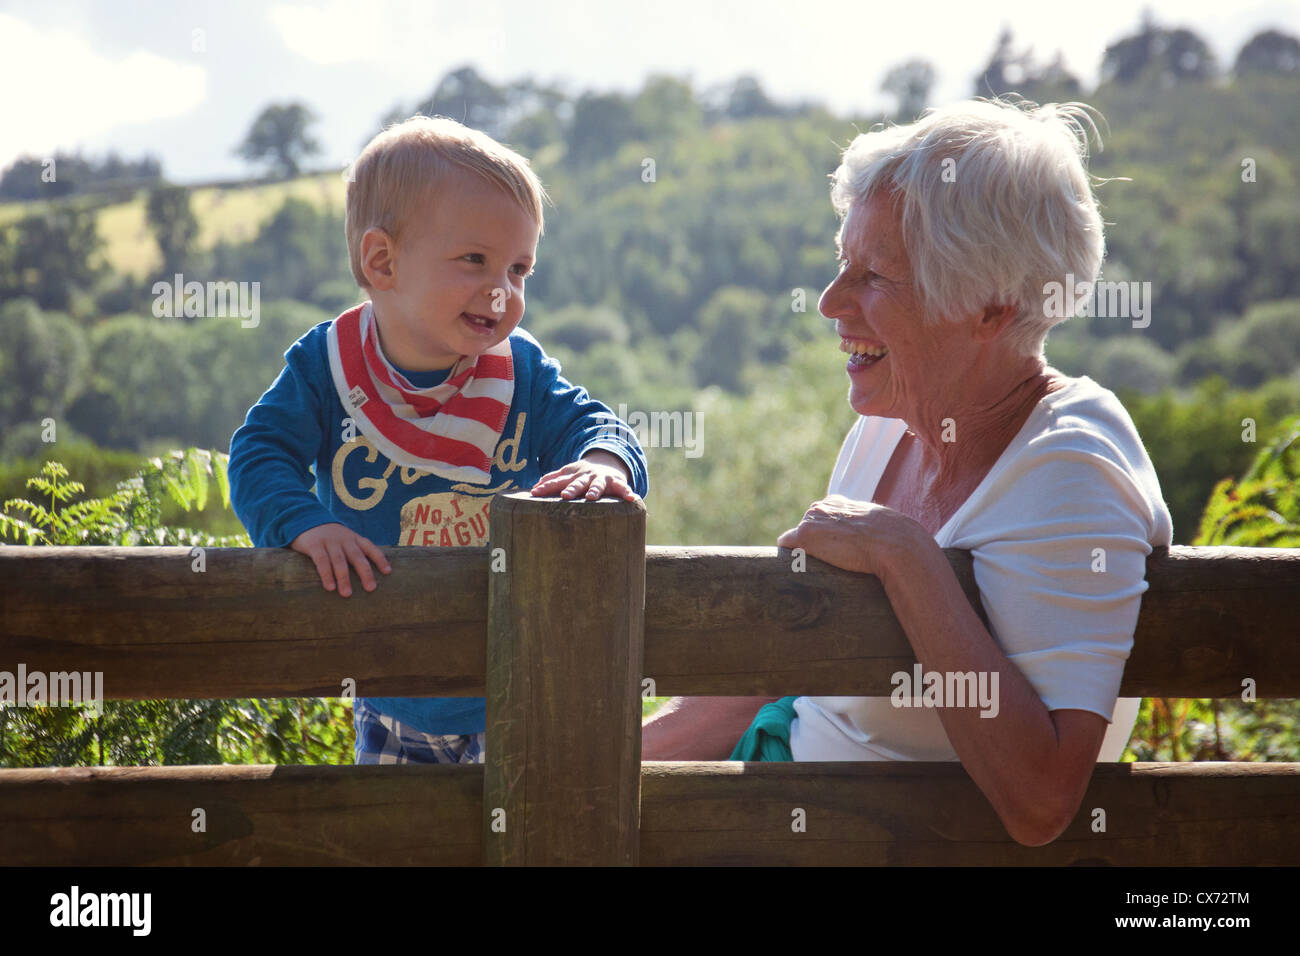 Elderly woman resting her arm over the back of a bench while a toddler boy stands next to her on the bench in a country setting Stock Photo